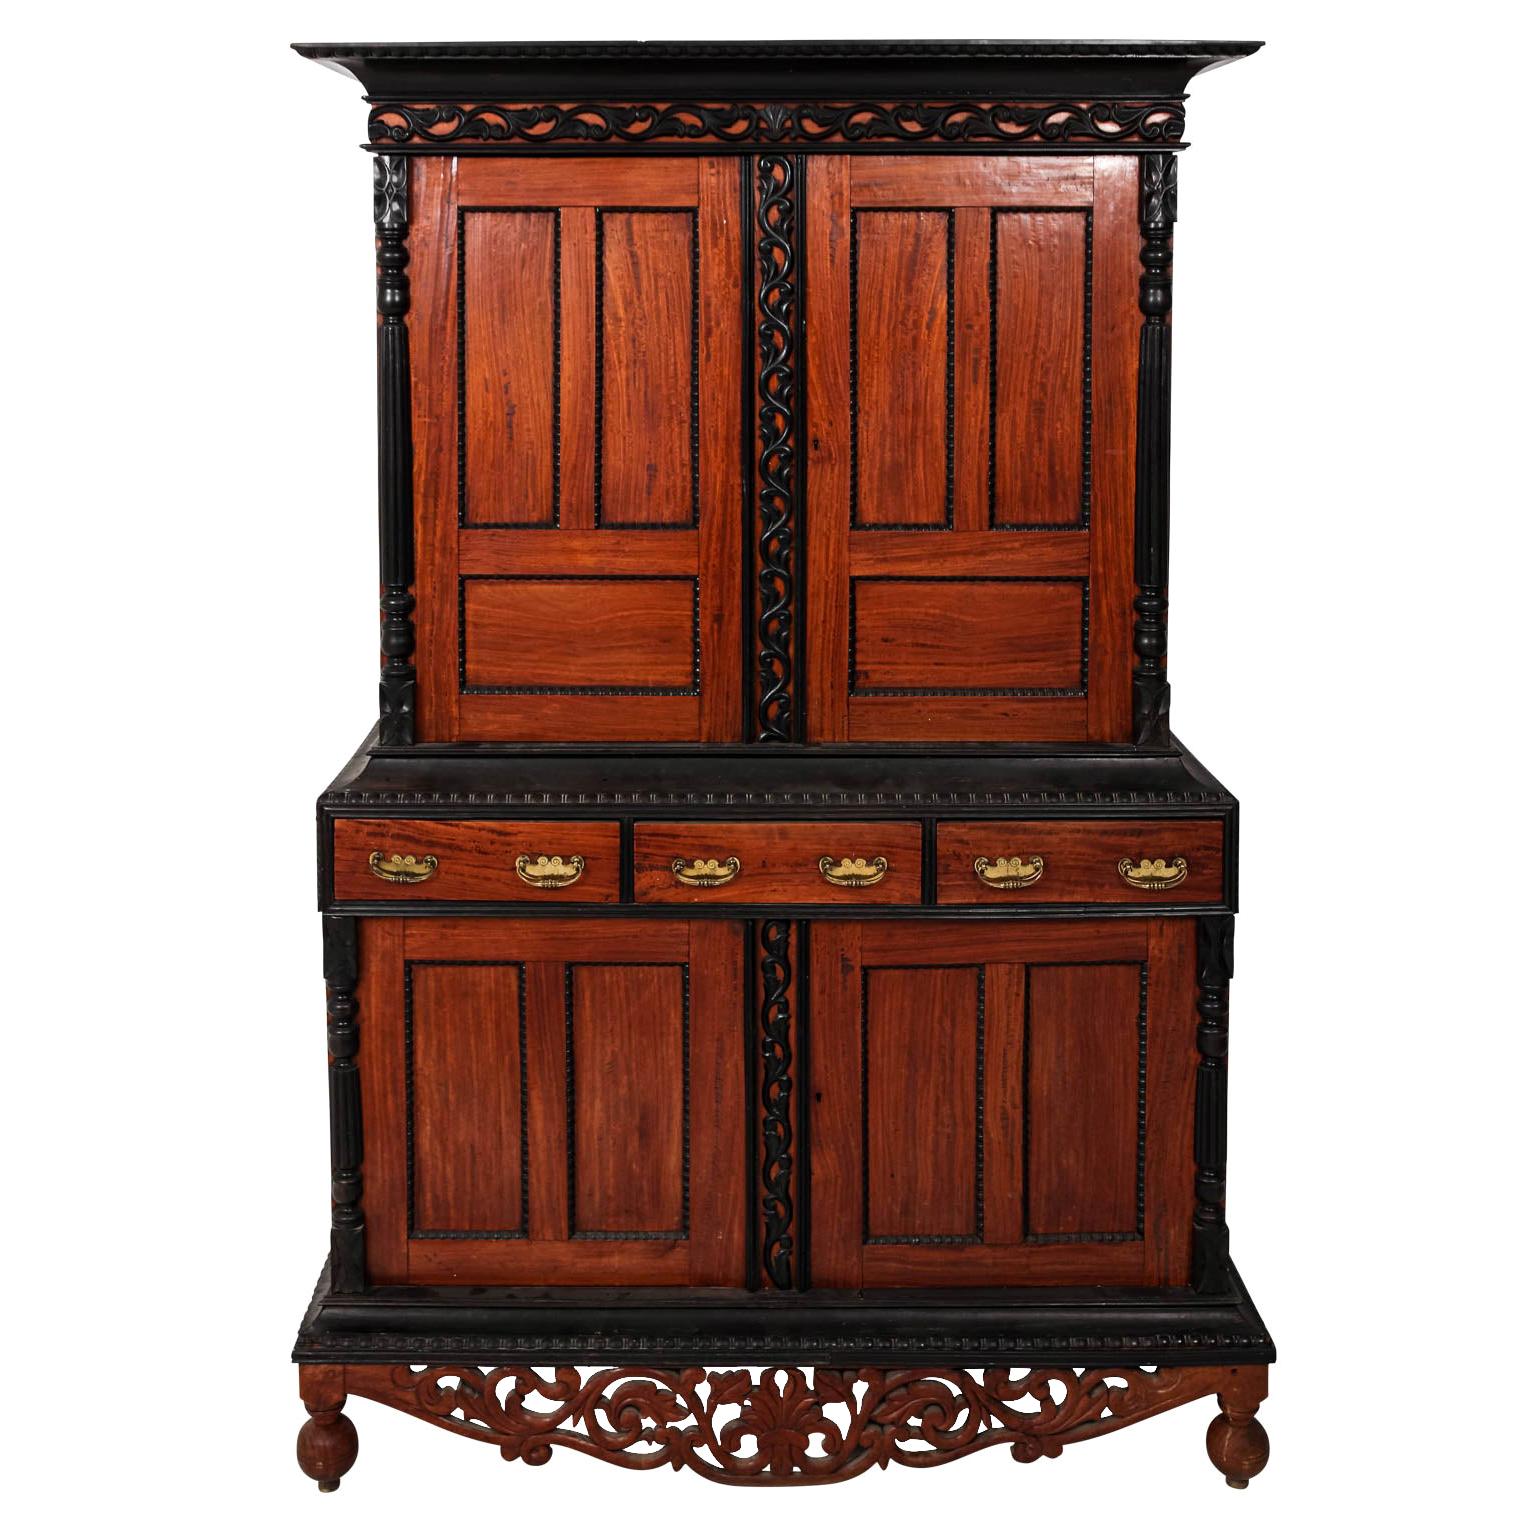 Anglo-Indian Style Satinwood and Ebony Cabinet